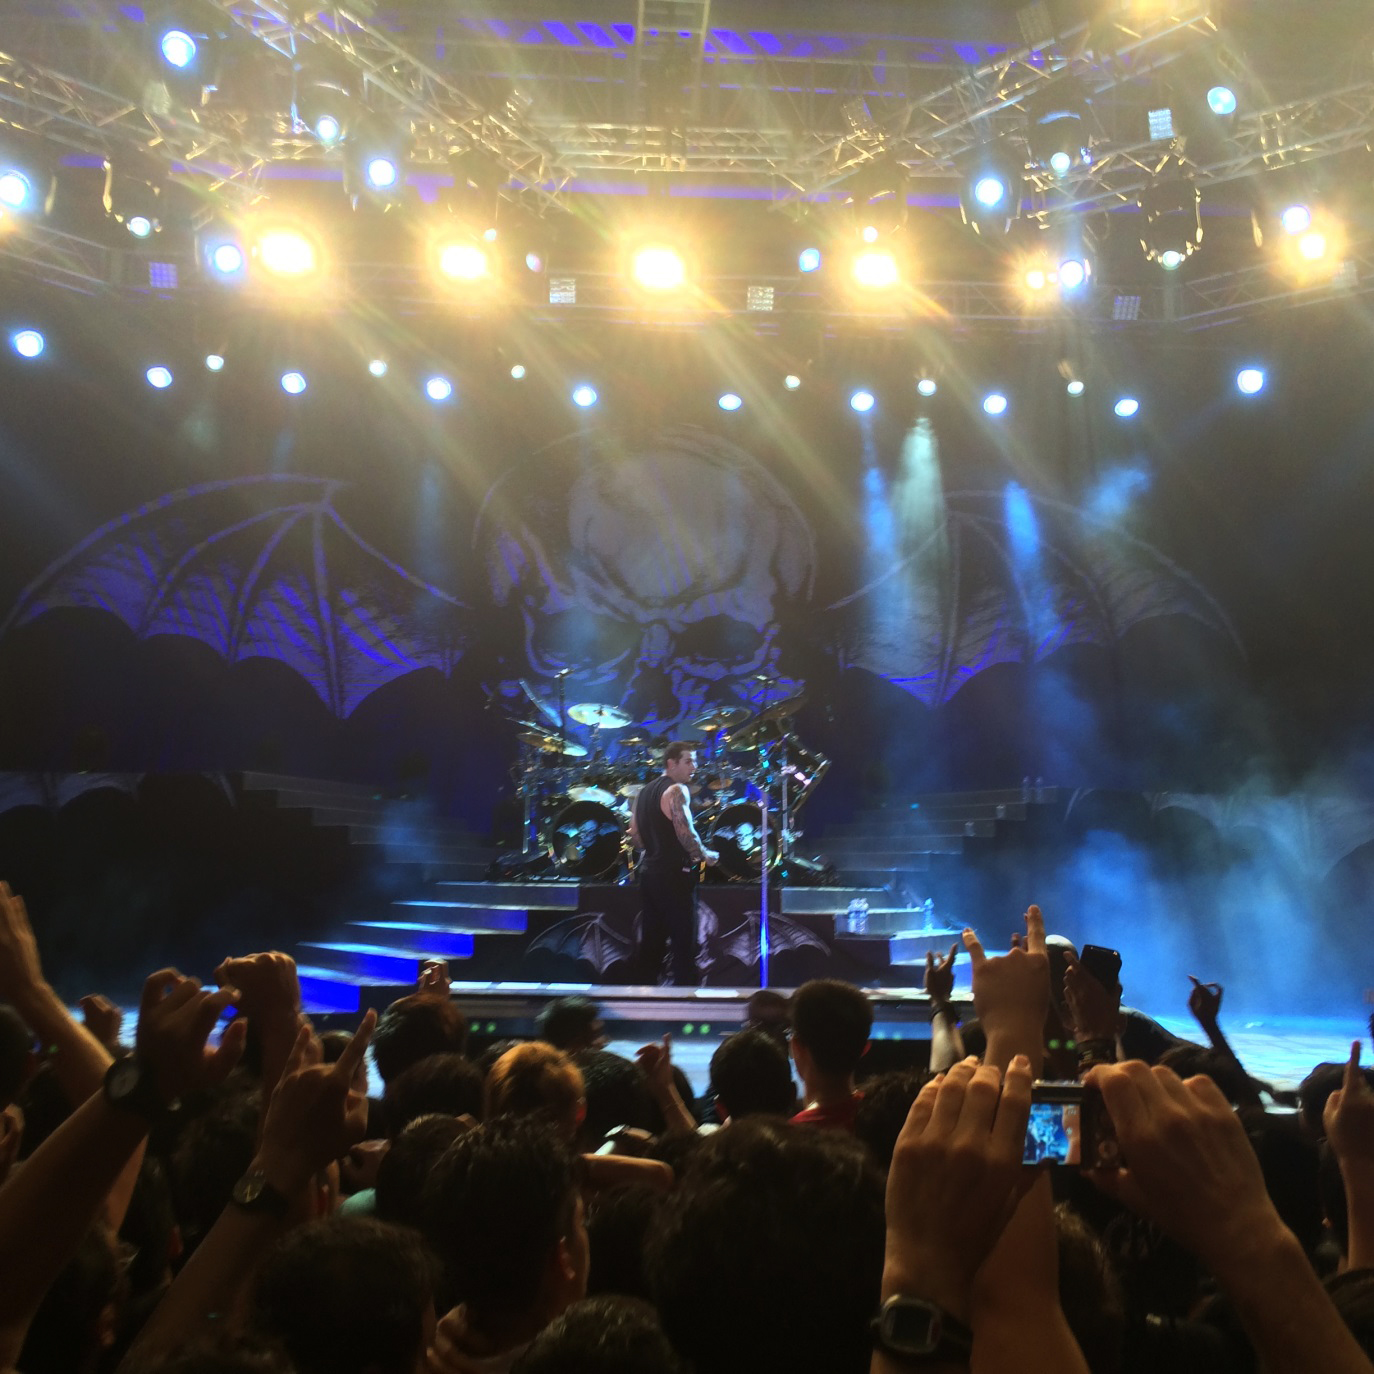 The Coliseum Roars: From Shepherd of Fire to A Little Piece of Heaven, iconic  heavy metal band Avenged Sevenfold performed their fan favourites in an energetic,  heart-thumping concert at the Hard Rock Hotel in Resorts World Sentosa. (Photo:  Dzulfikaar Sutandar)